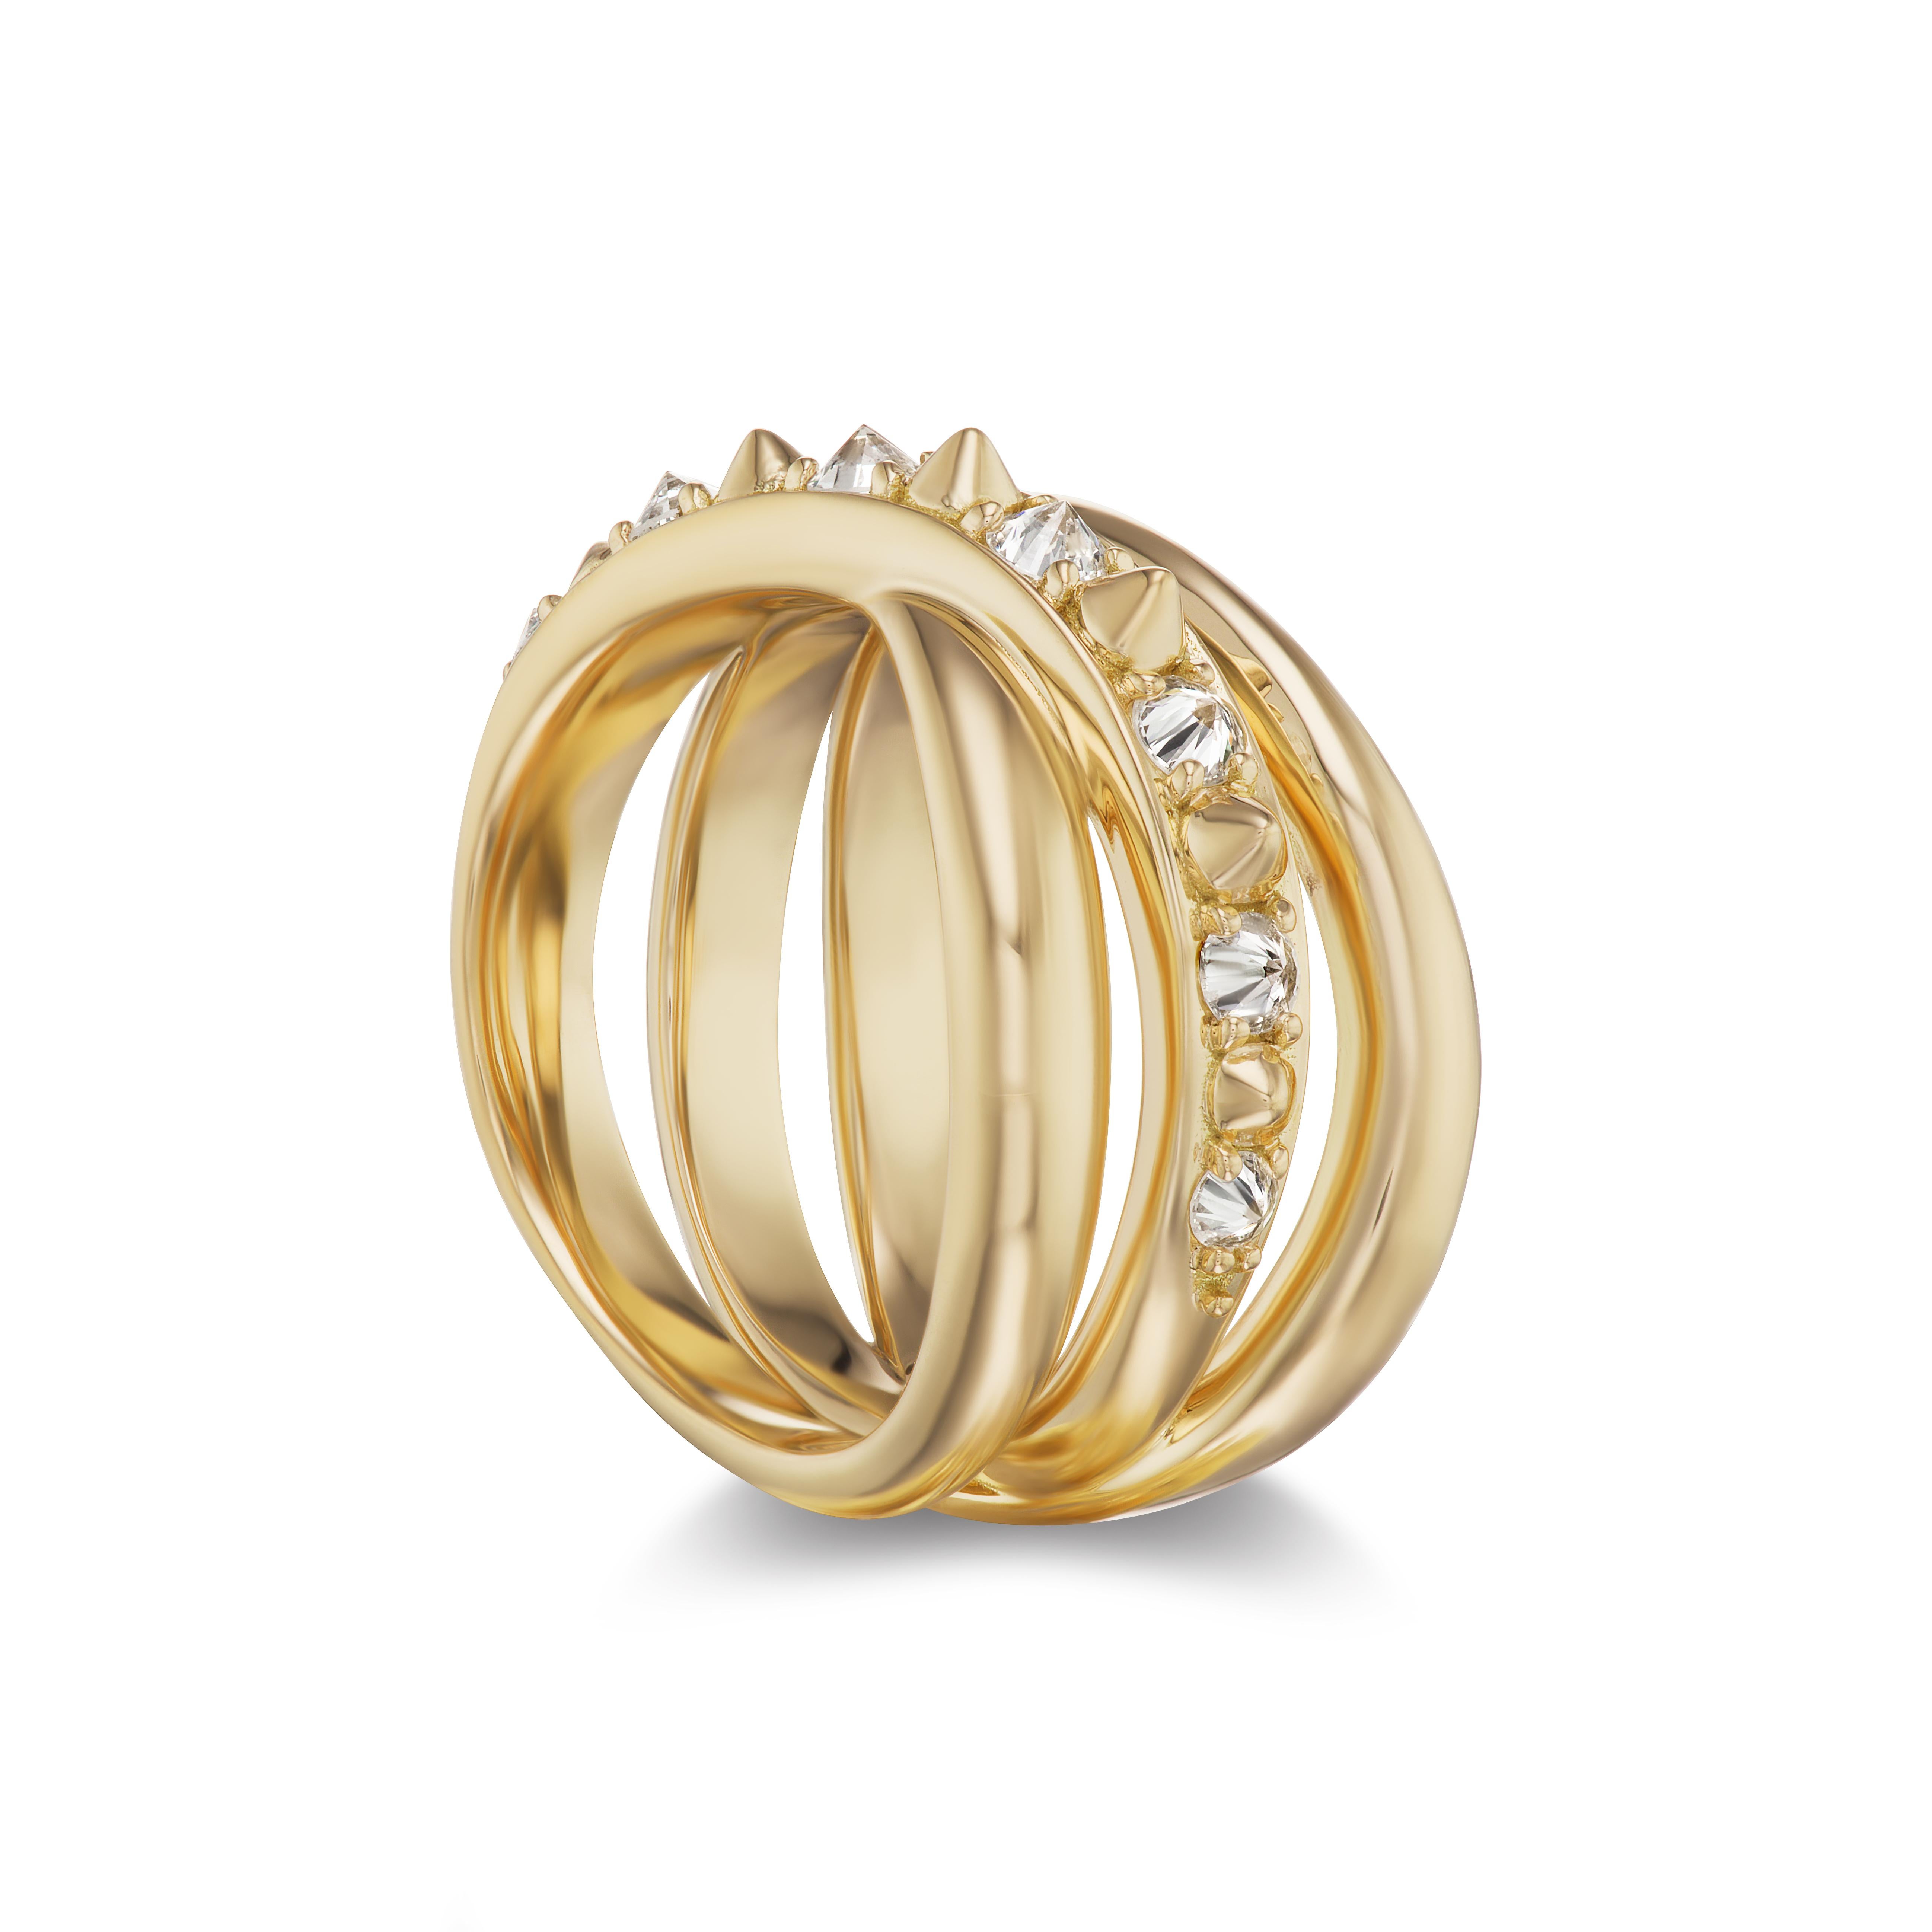 For Sale:  AnaKatarina 18k Gold and Inverted Diamond 'Attitude' Ring 2